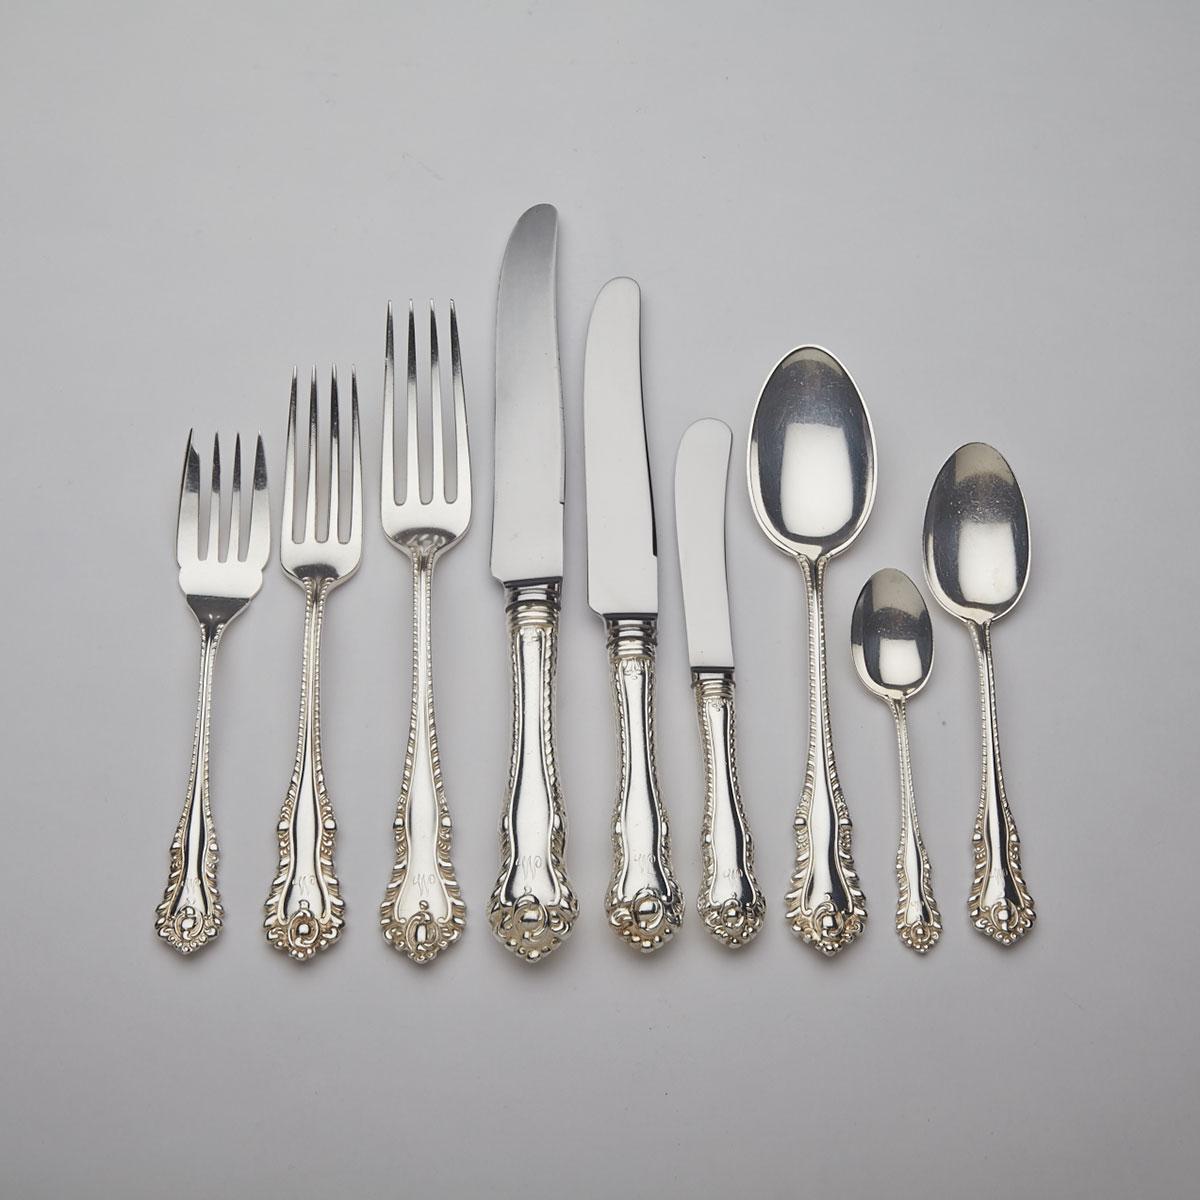 Canadian Silver ‘Gadroon’ Pattern Flatware Service, Henry Birks & Sons, Montreal, Que., 20th century 